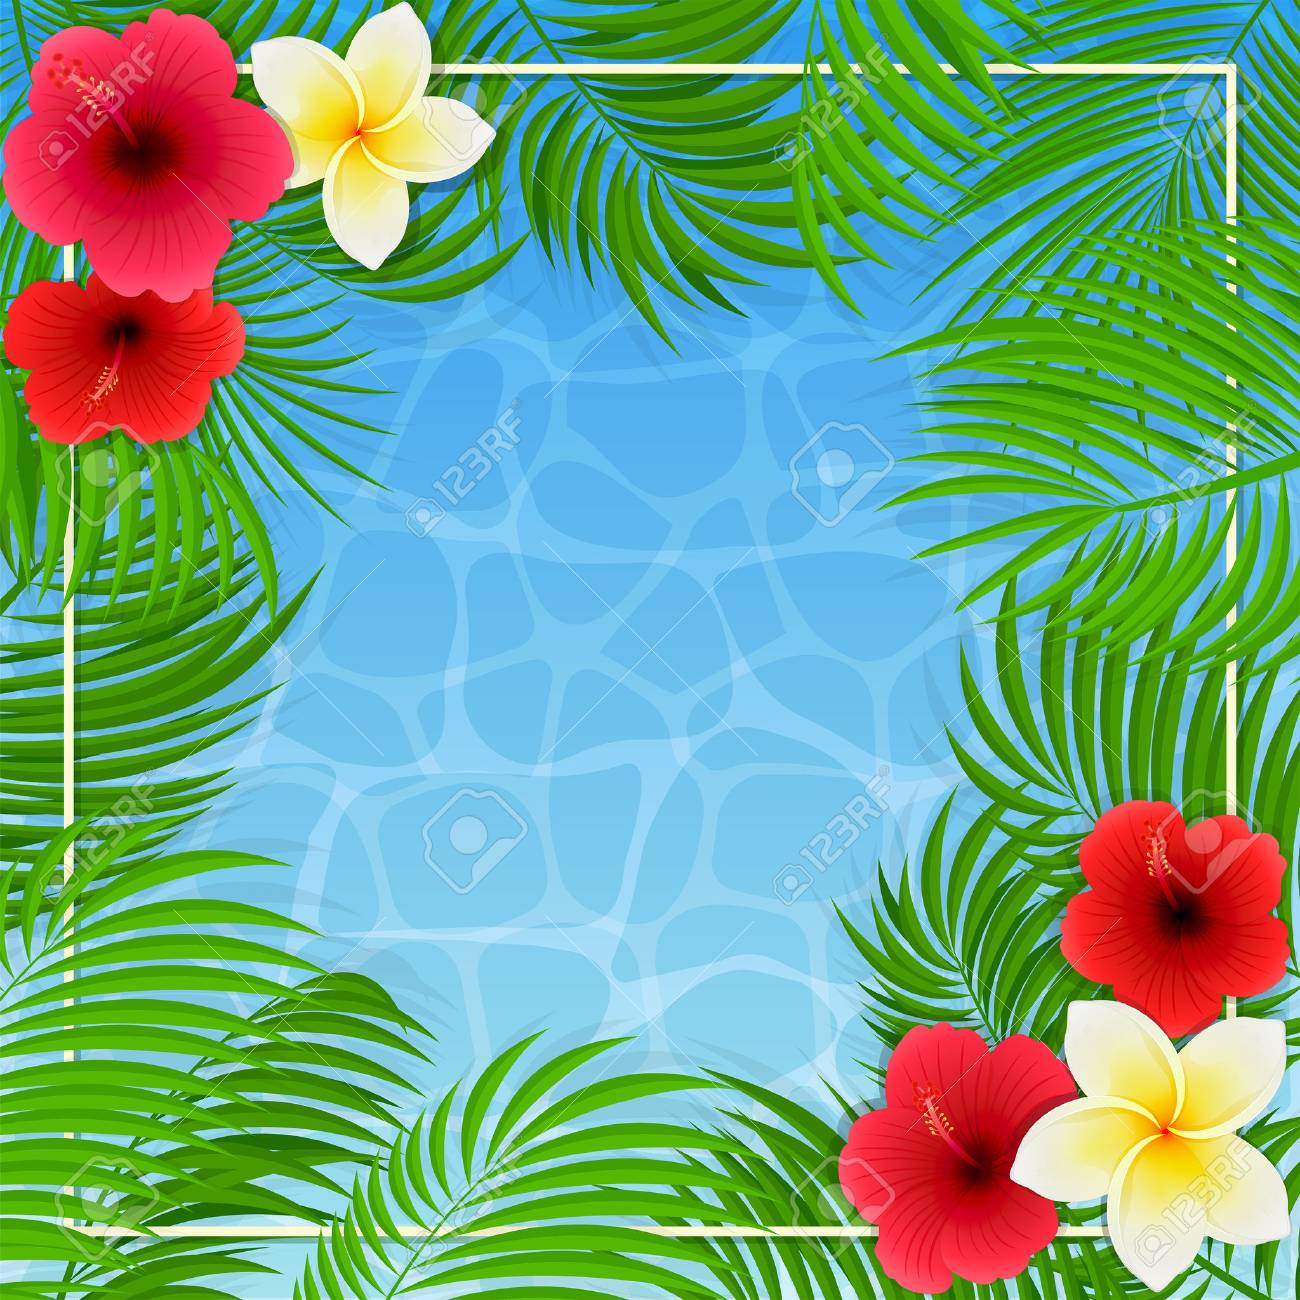 Summer Background With Palms And Hawaiian Flowers Royalty